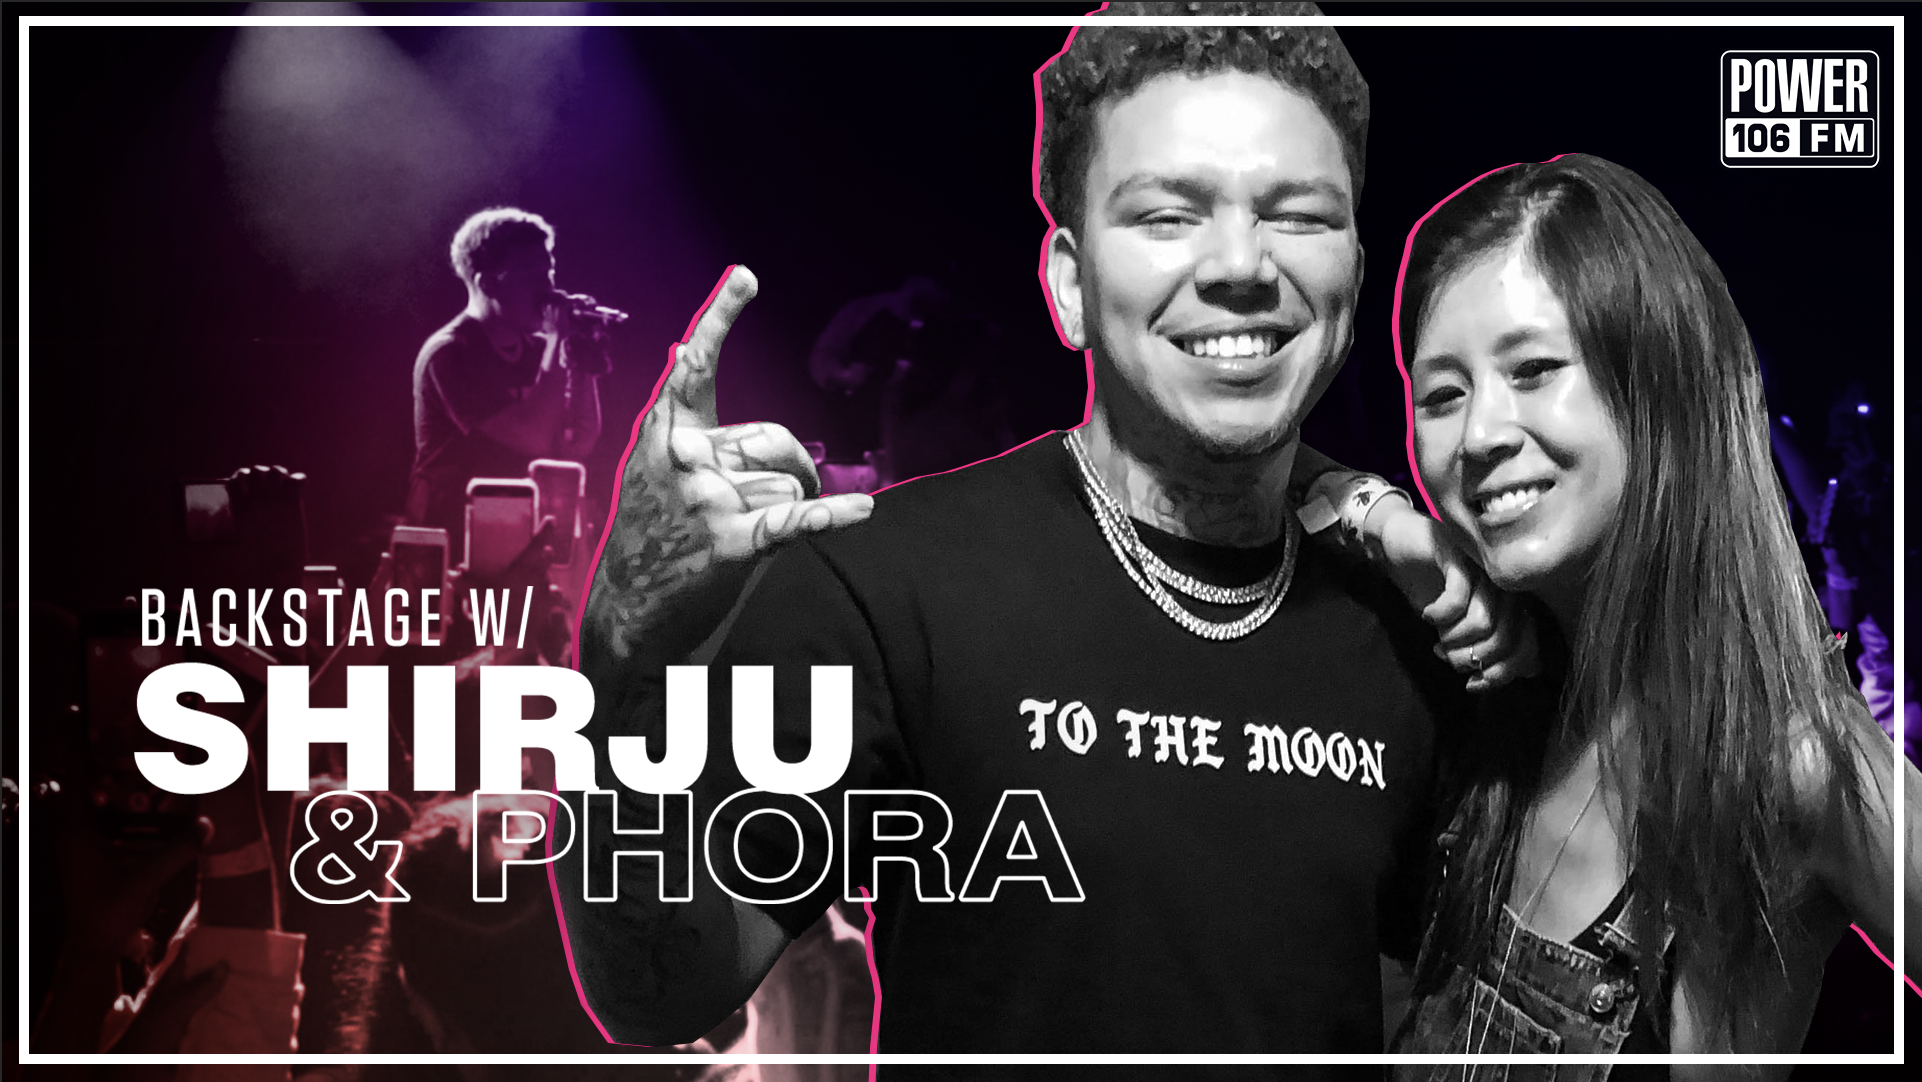 Phora breaks down pre-show rituals, getting over his nerves & favorite song to perform